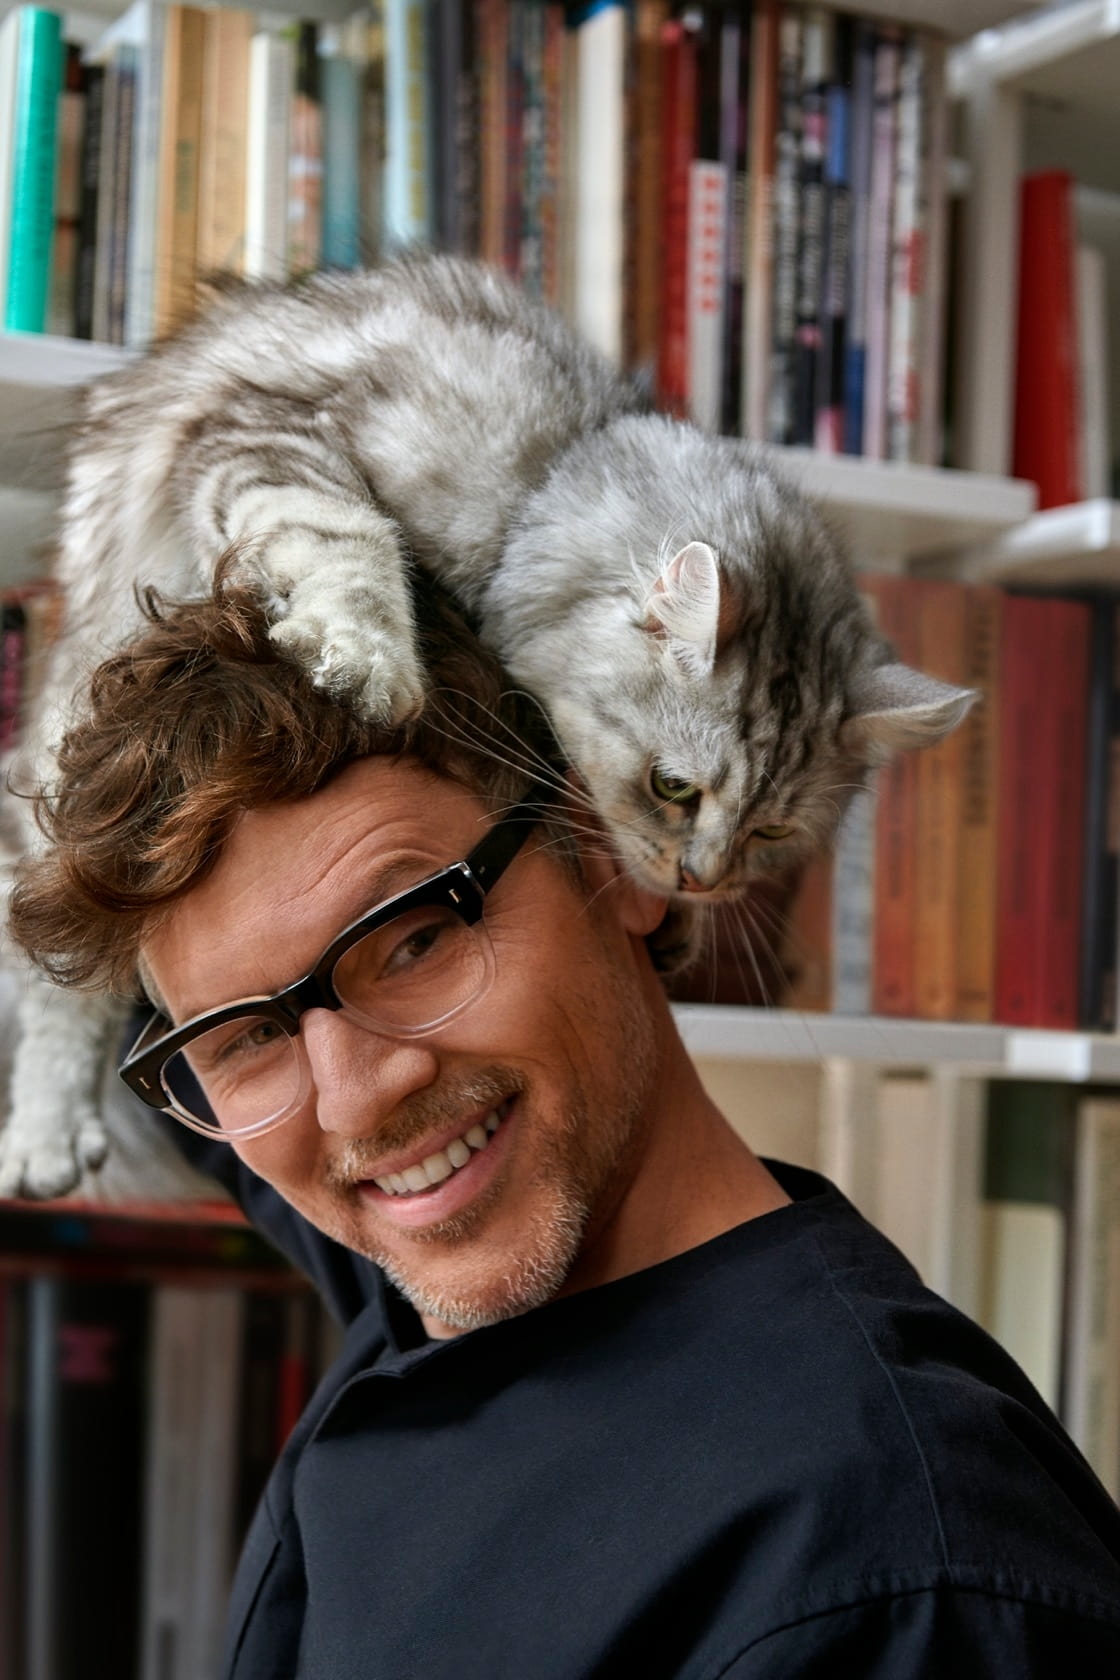 A fluffy cat tries to perch on top of a man's head. The man looks amused